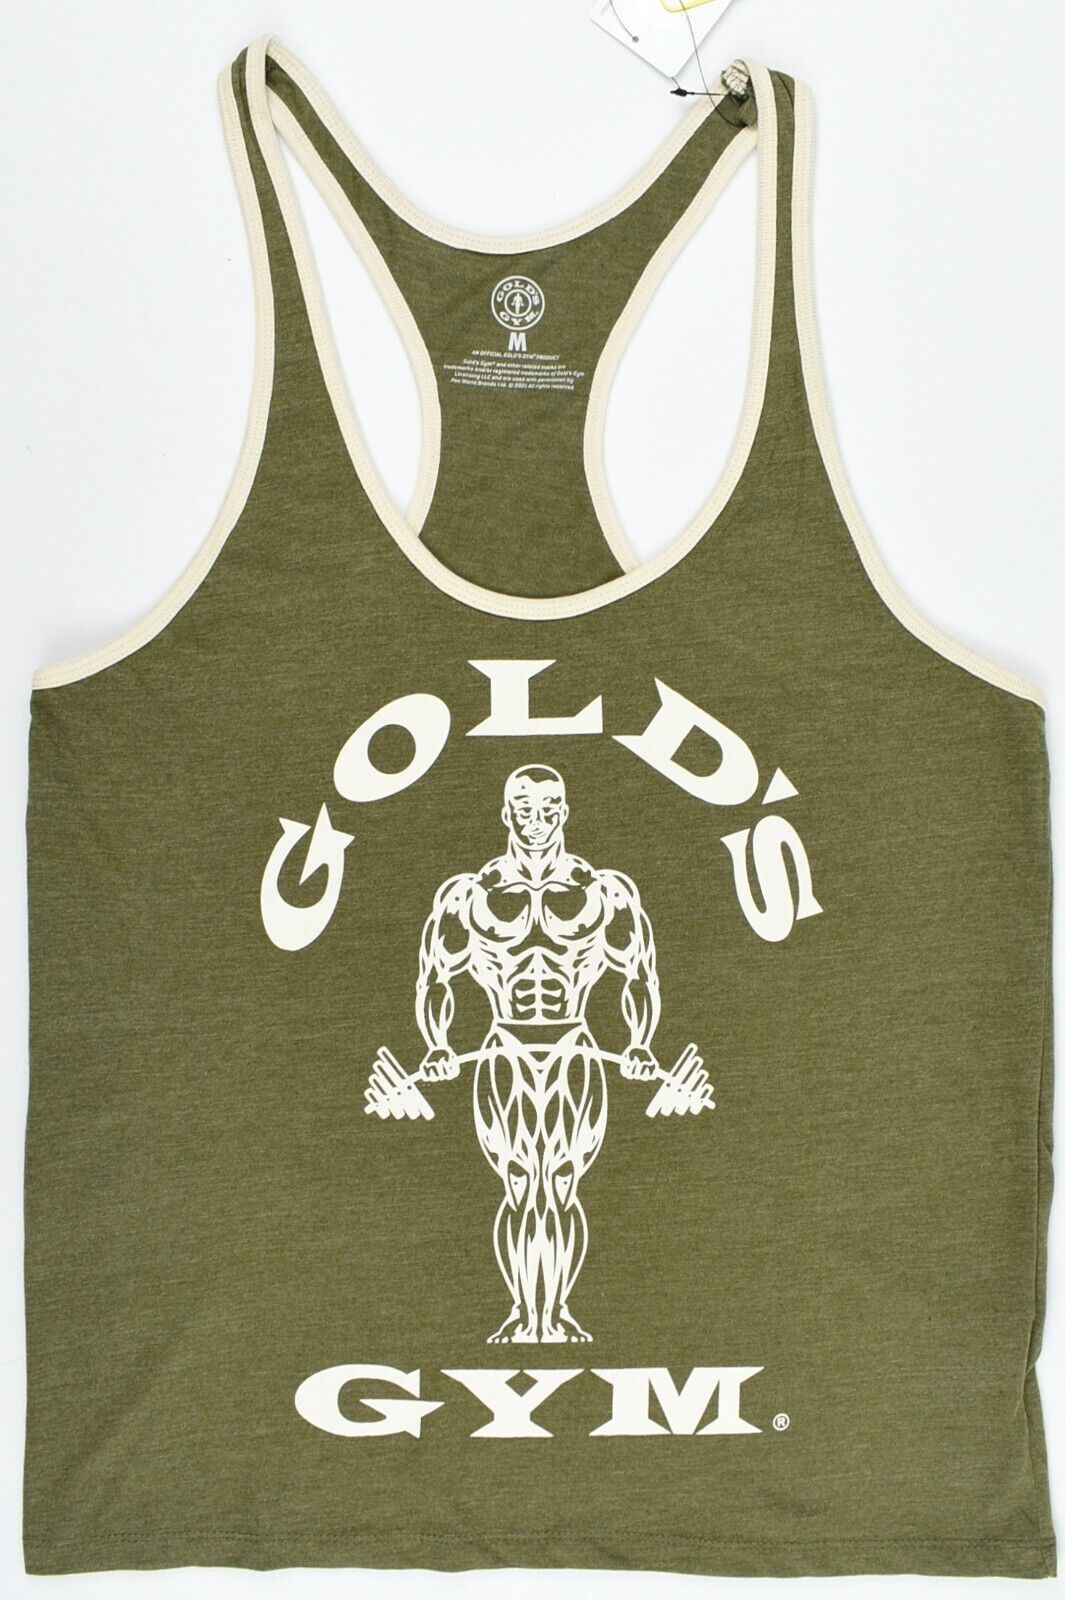 GOLD'S GYM Core Collection Men's MUSCLE JOE Vest Top, Army Green, size L